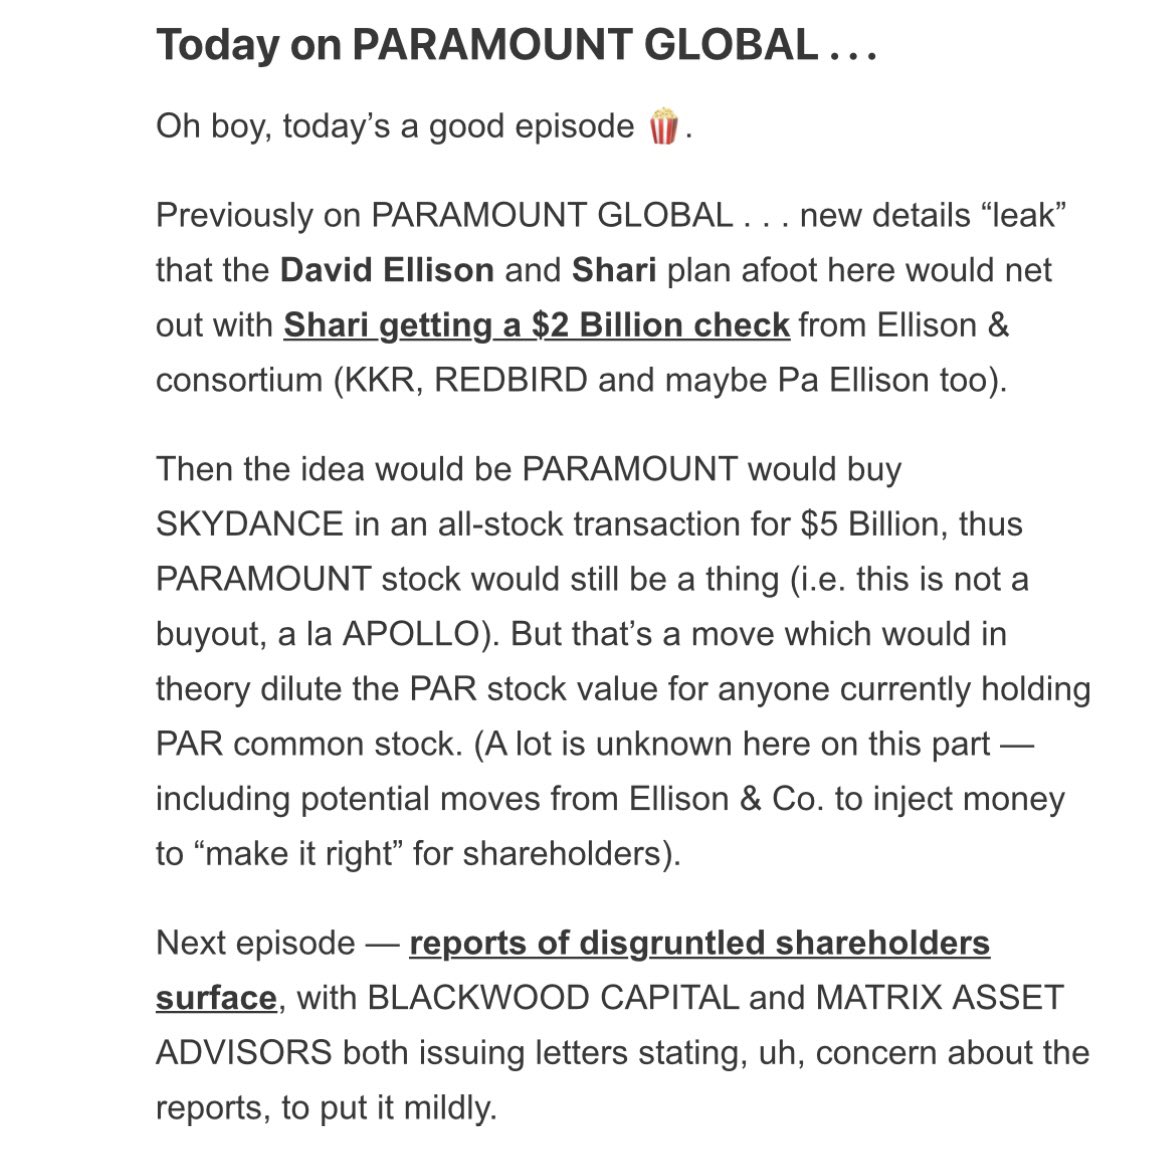 Today on The Wakeup: The Paramount deal is unfolding like a very sudsy soap opera. 🧼 Read all the latest developments and much more: theankler.com/p/sudden-par-b…